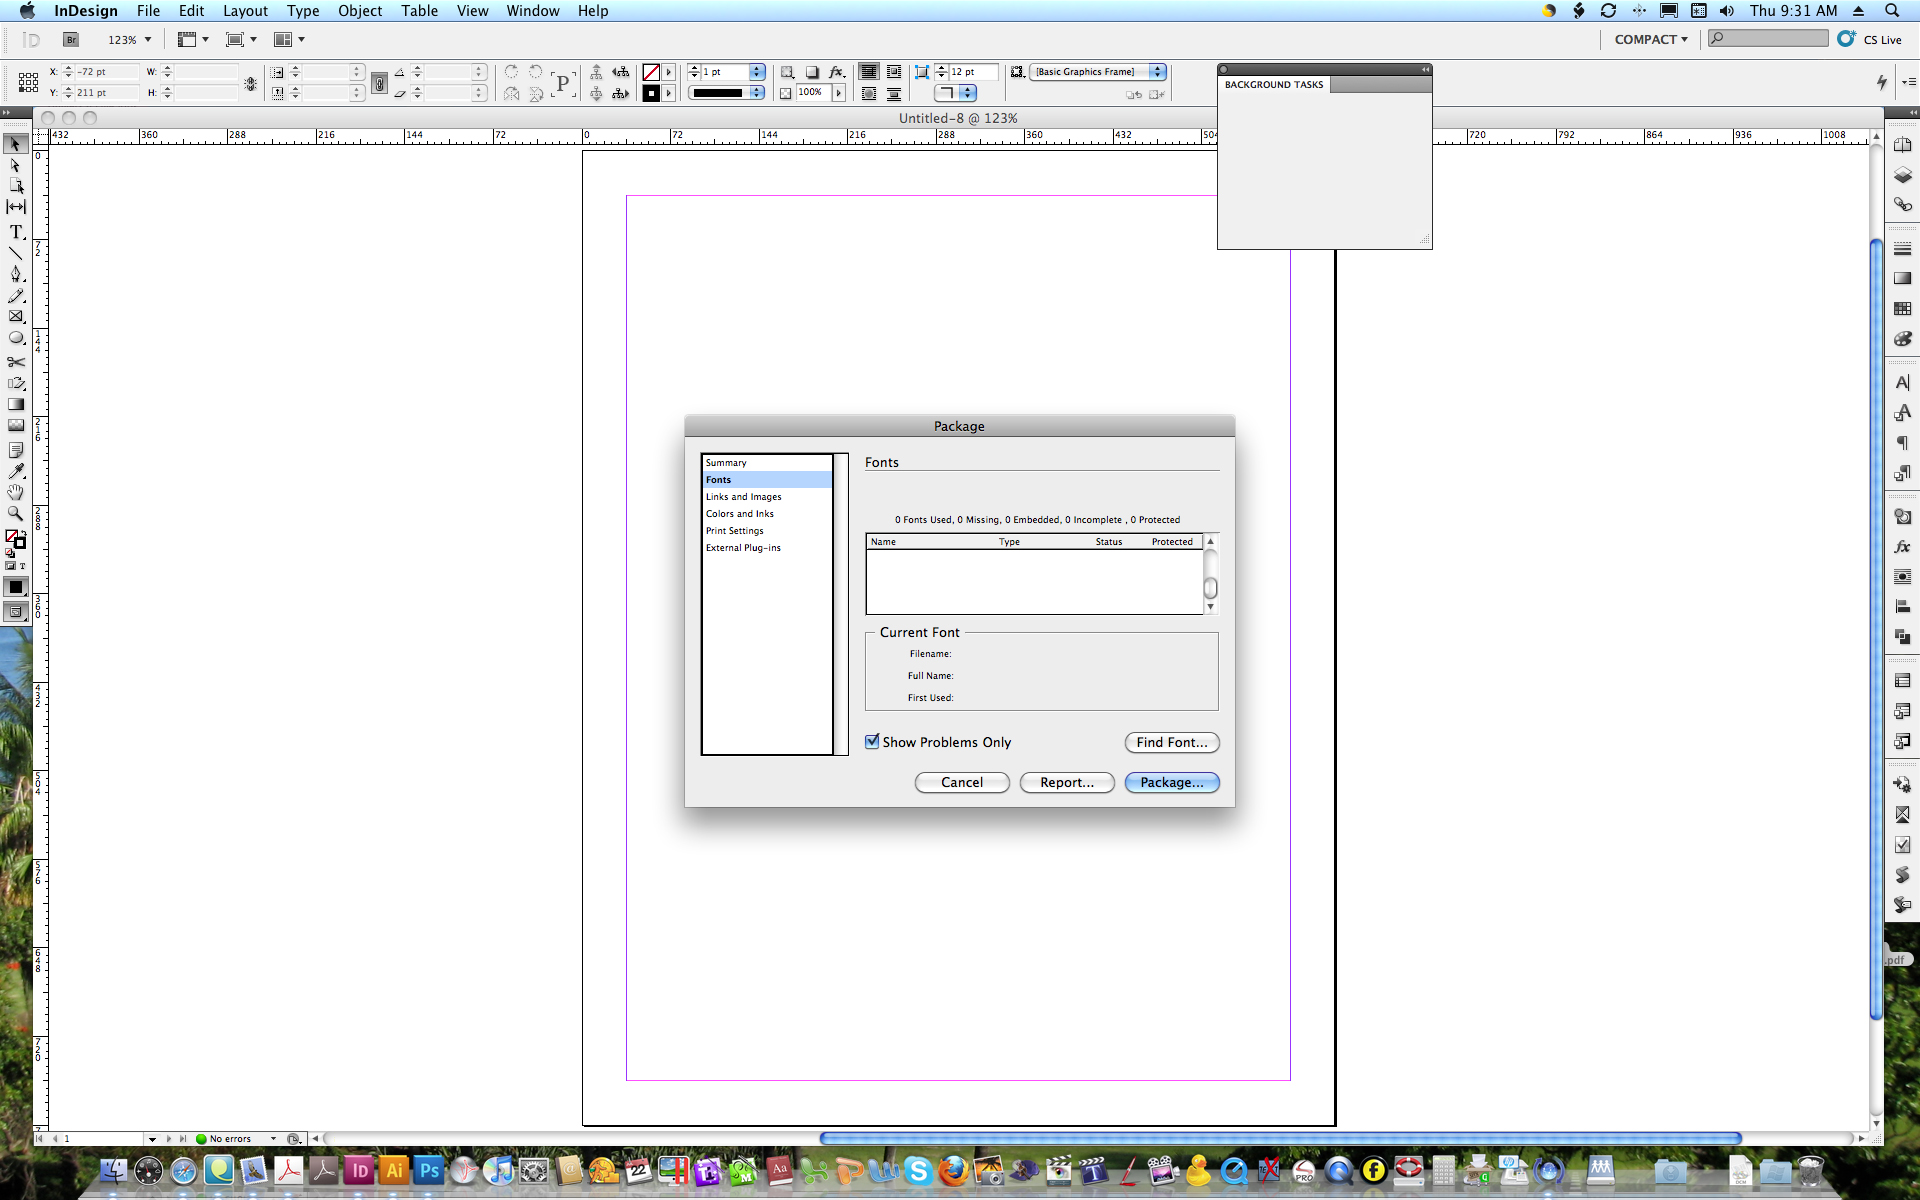 InDesign Package Window